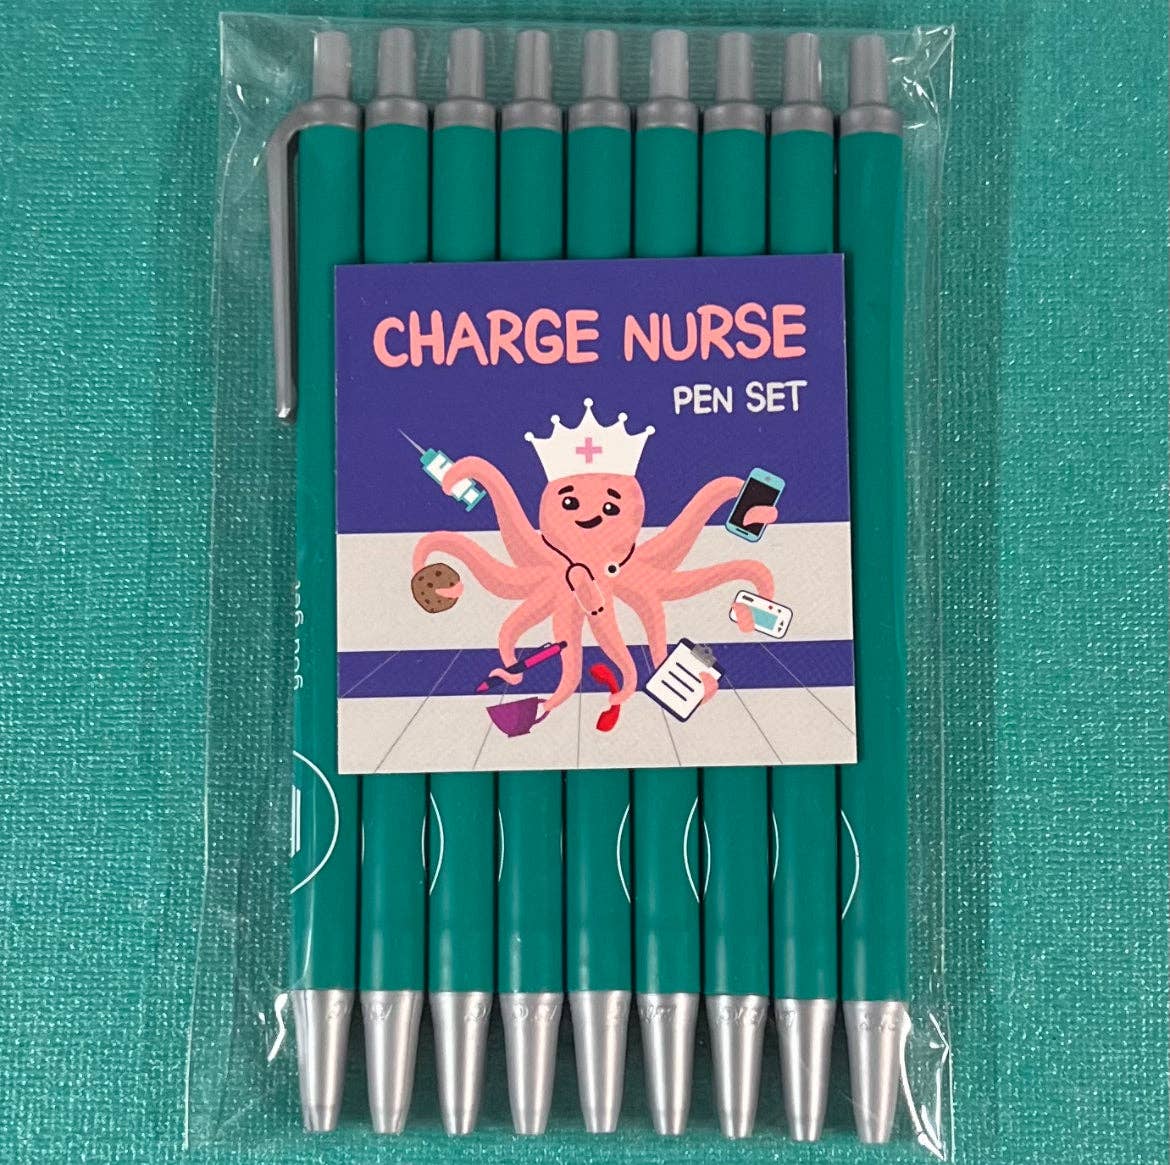 Wholesale Snarky Pens: Charge Nurse - Set of 9 Pens for your store - Faire